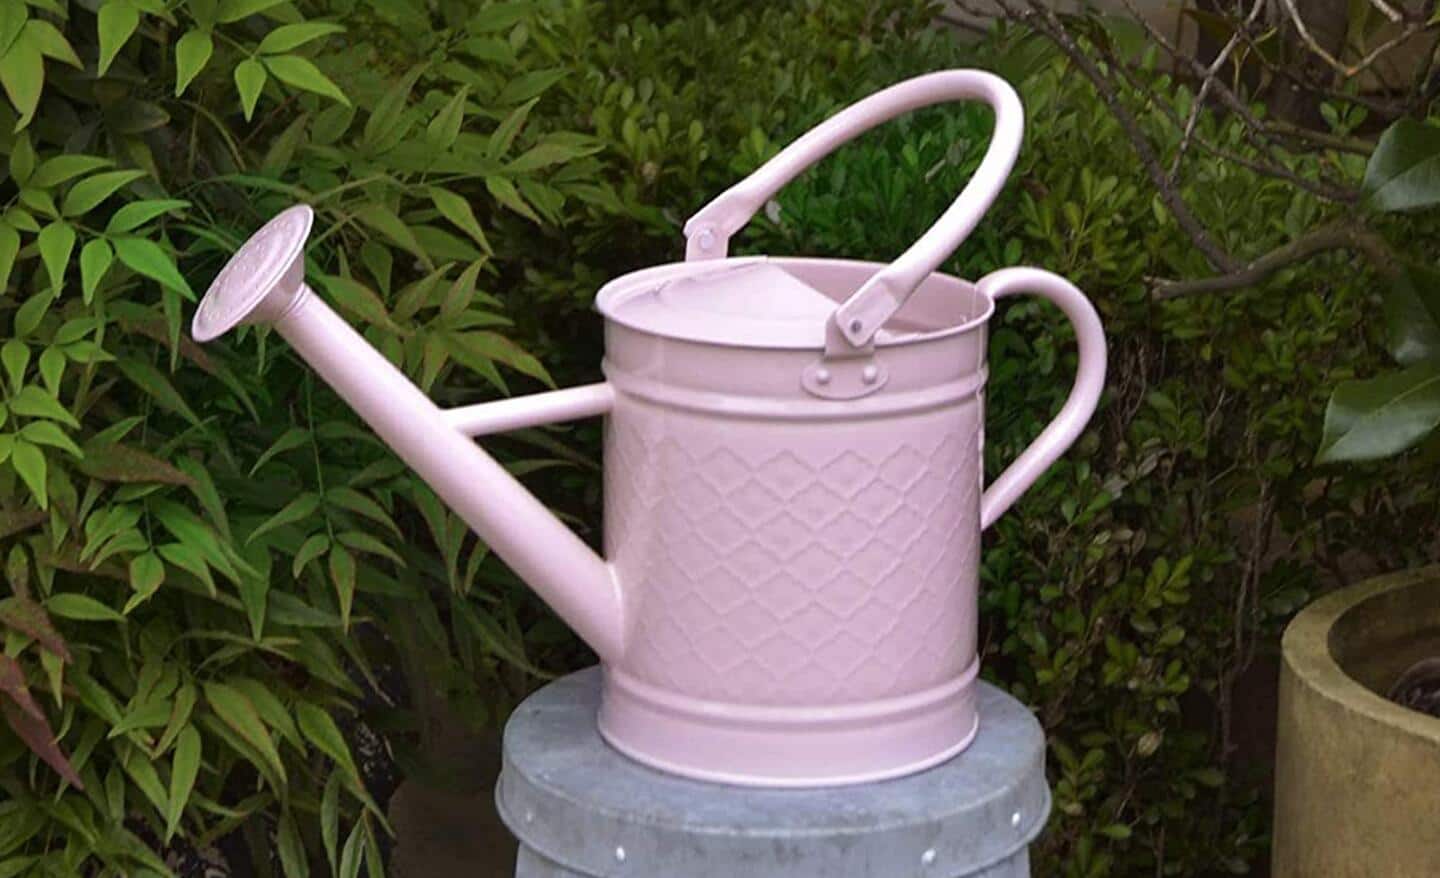 A pink metal watering can on a pedestal in a garden